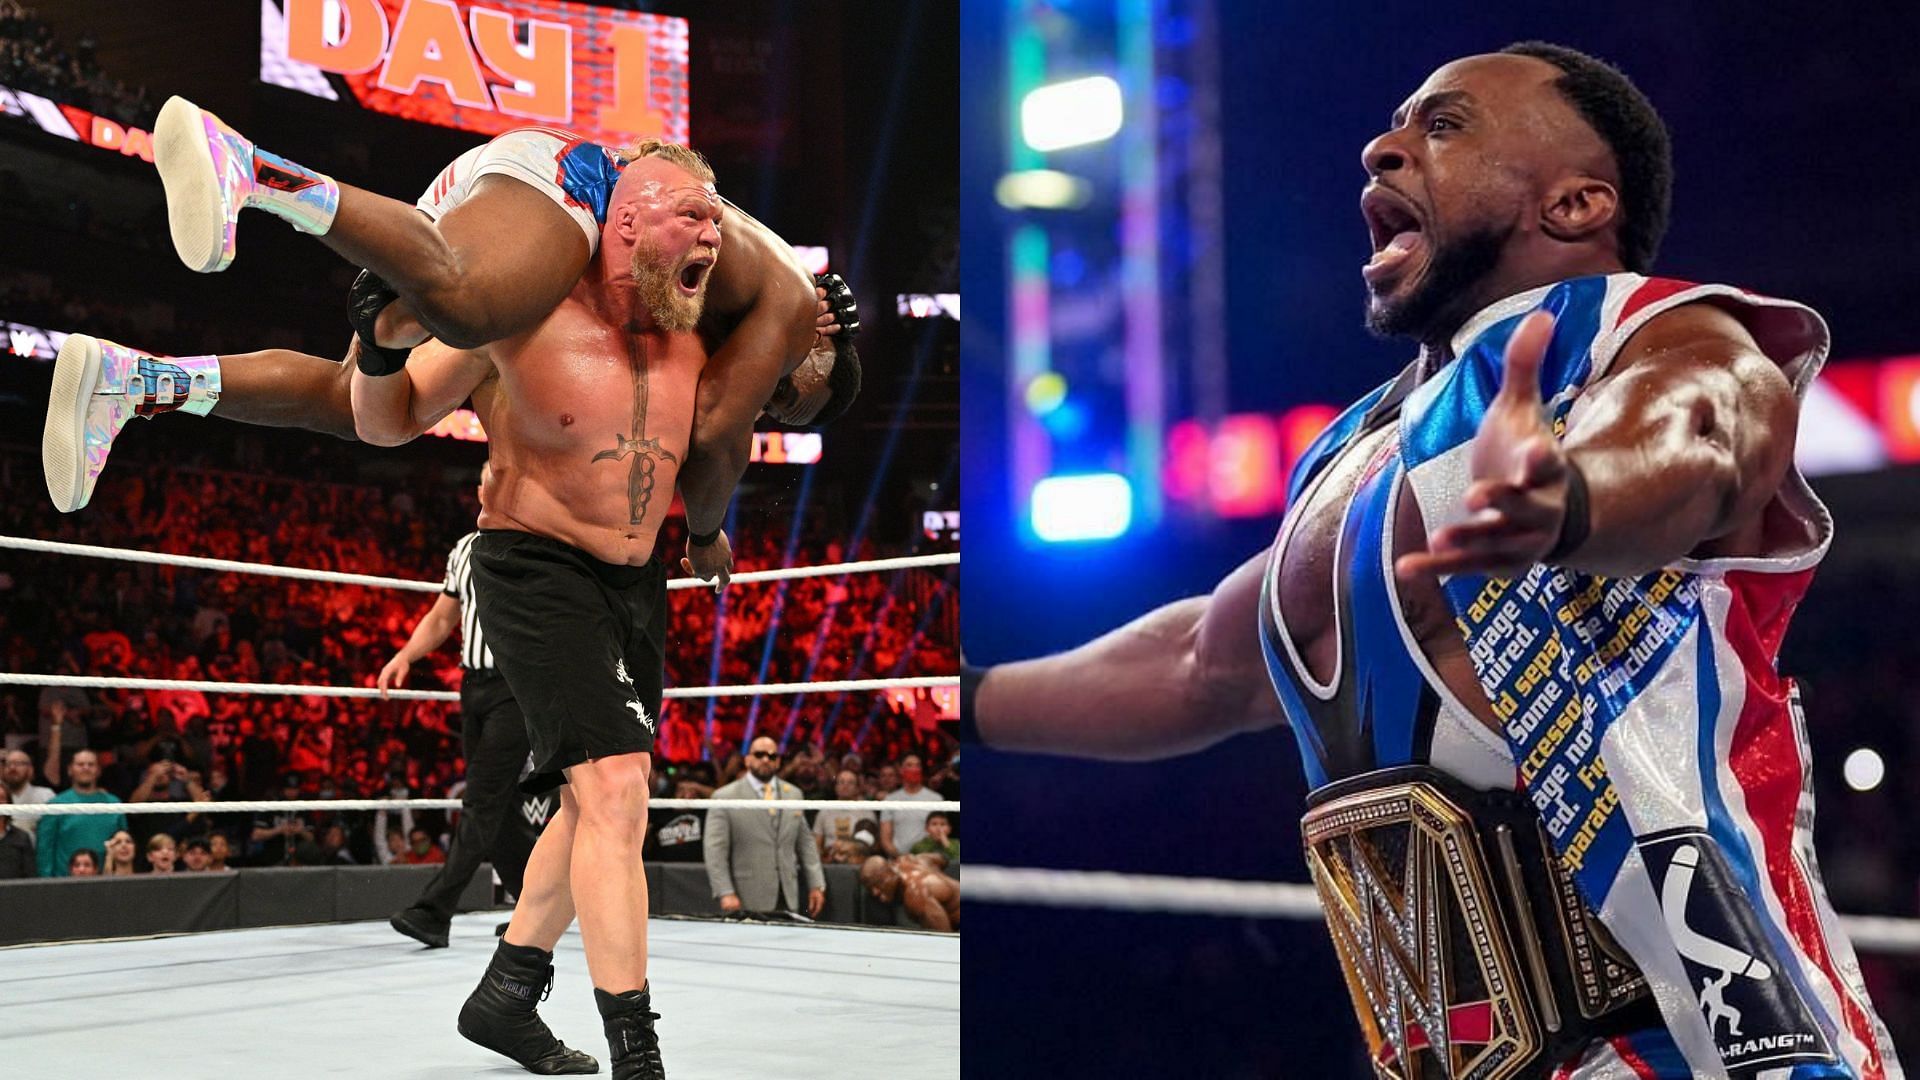 Brock Lesnar won the WWE TItle from Big E at Day 1